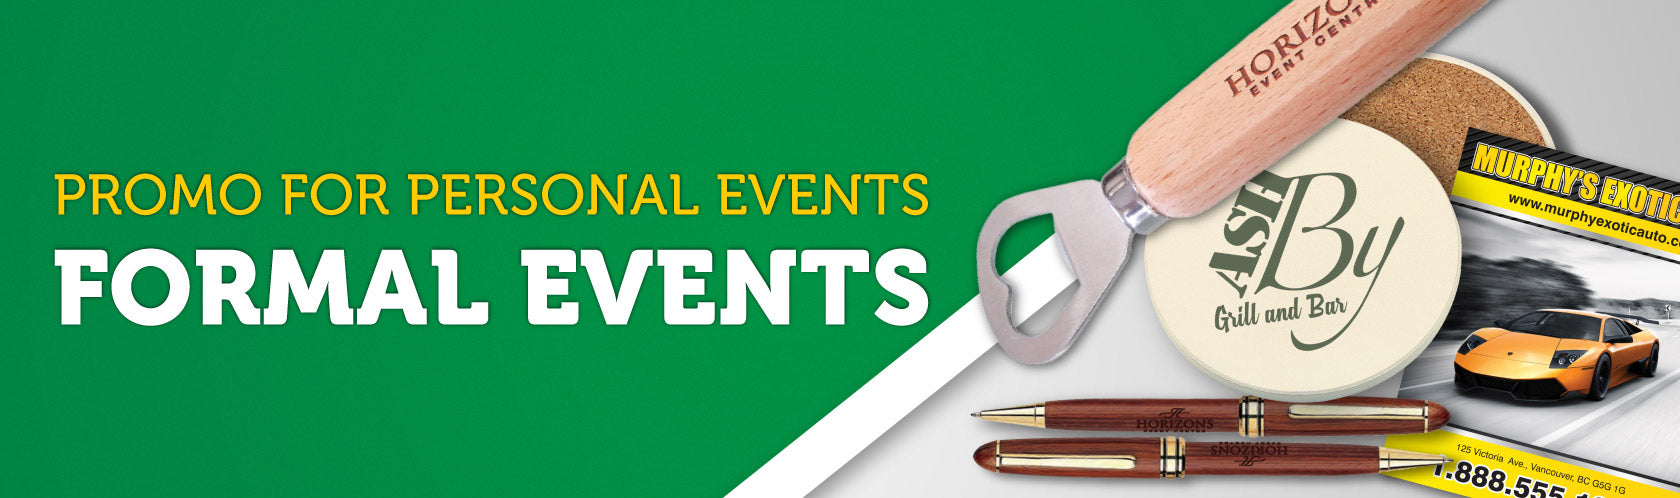 Promo for Personal Events - Formal Events